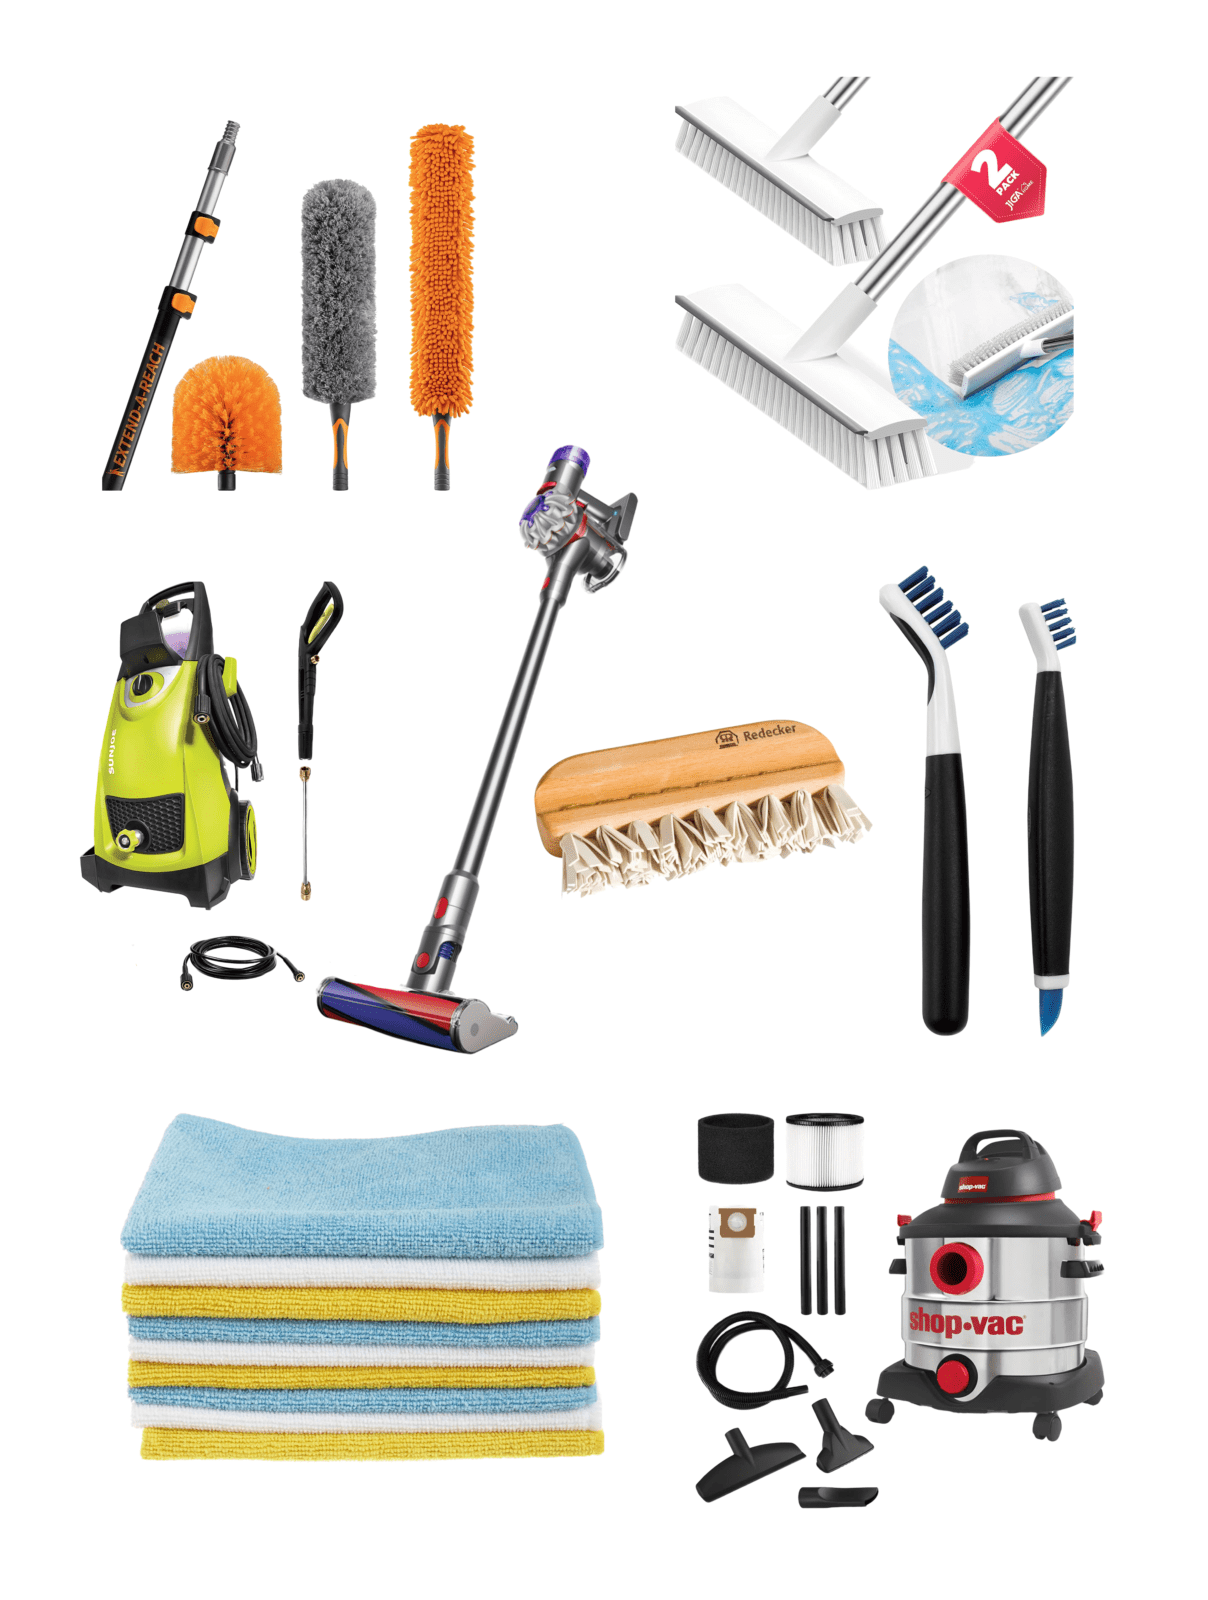 Home Cleaning Tools I Swear By | Wit & Delight